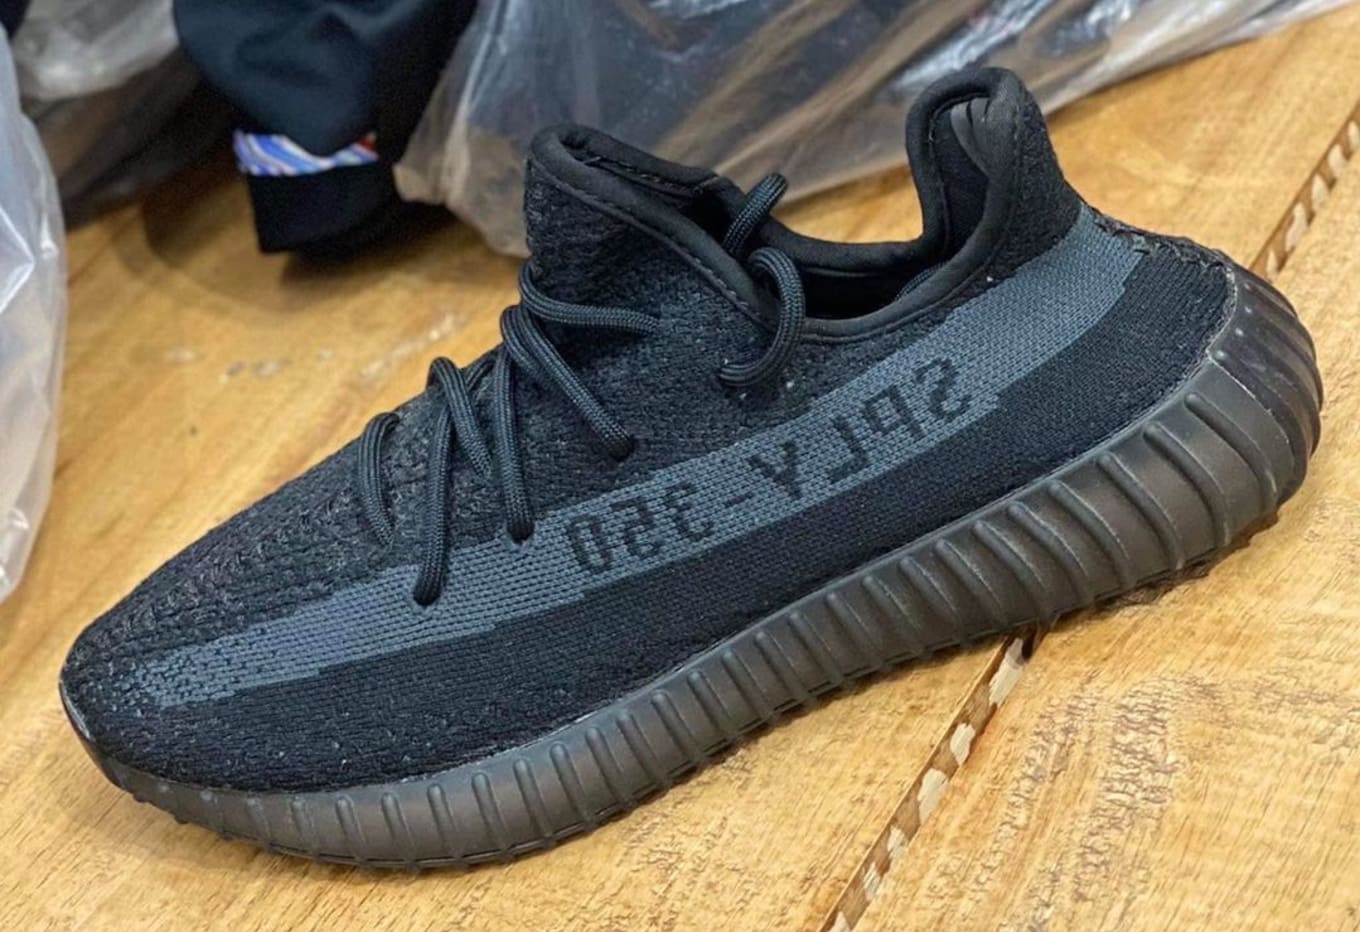 Resistant Round down Wrap Adidas Yeezy Boost 350 V2 'Onyx' Release Date Fall 2022 | Sole Collector